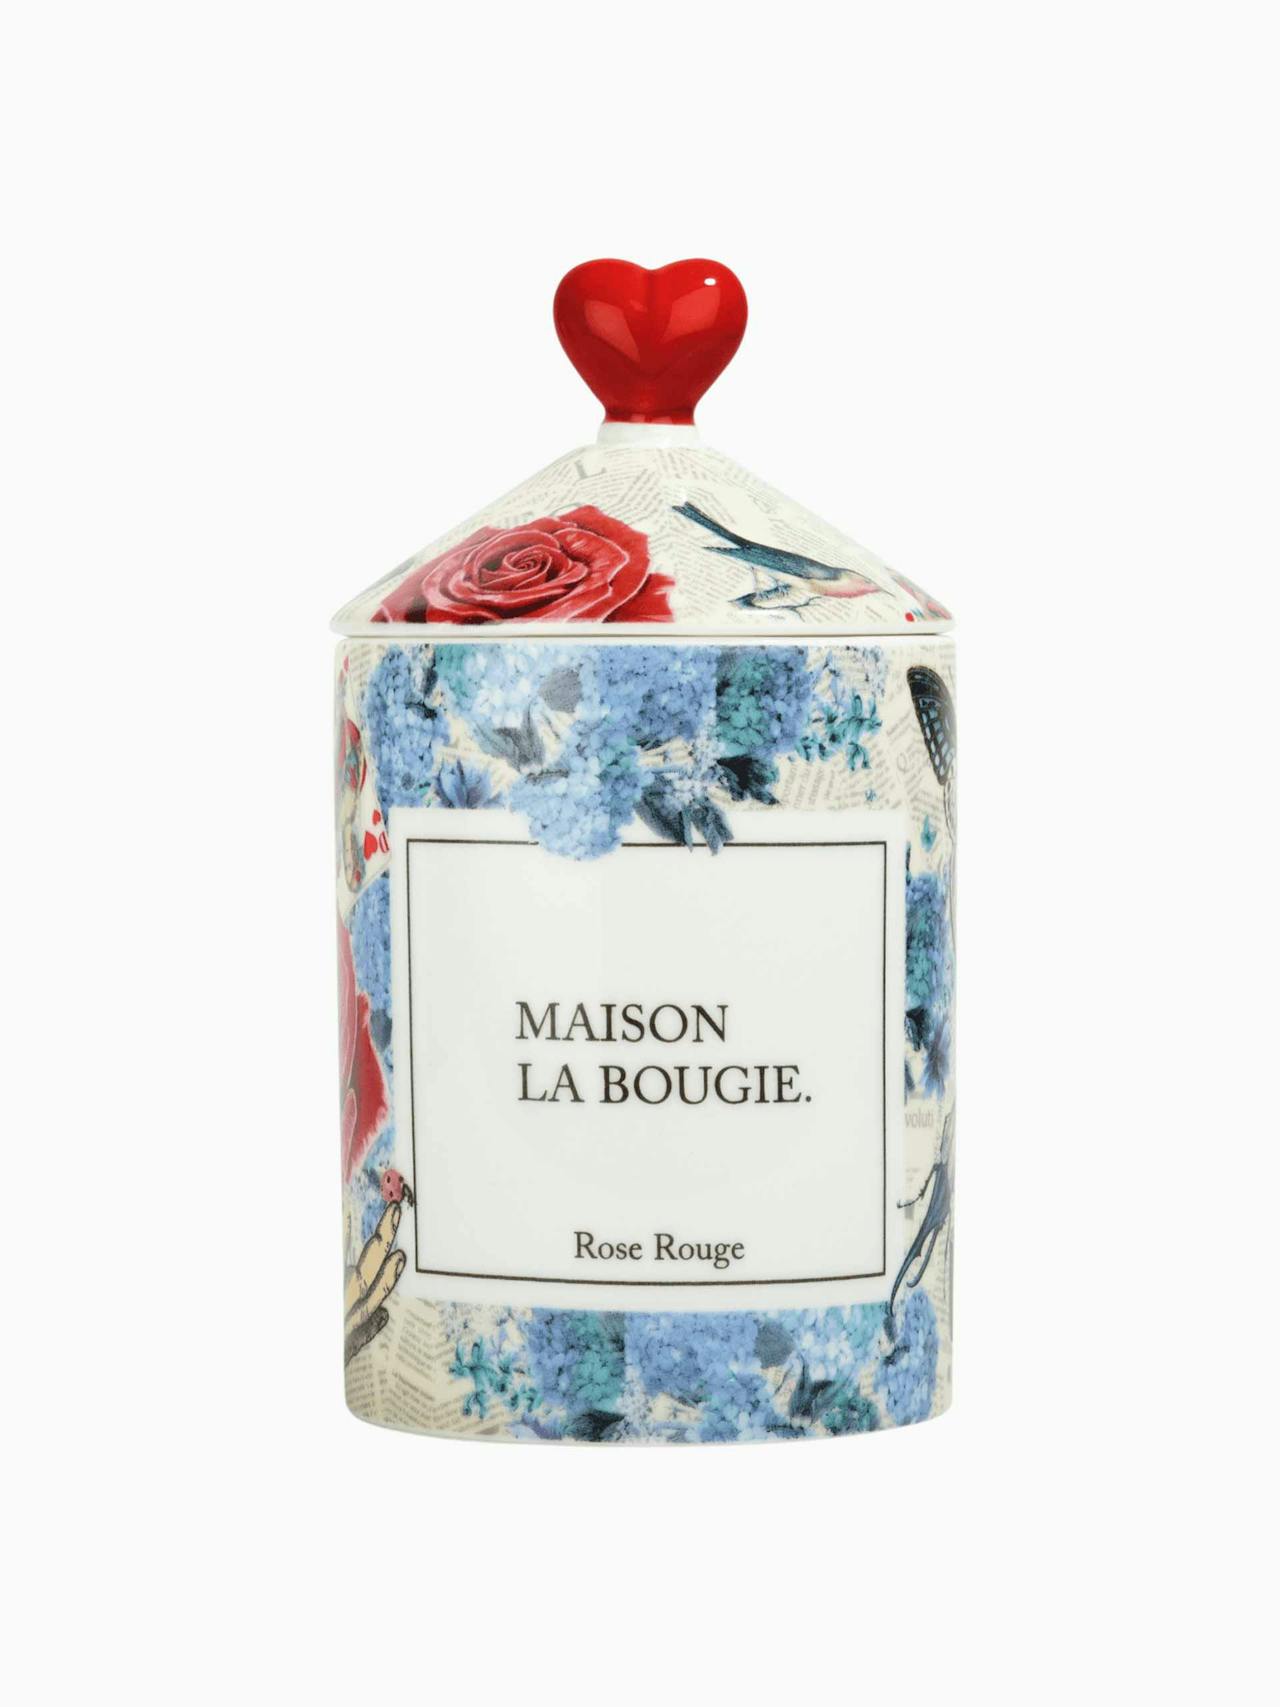 Rose Rouge scented candle